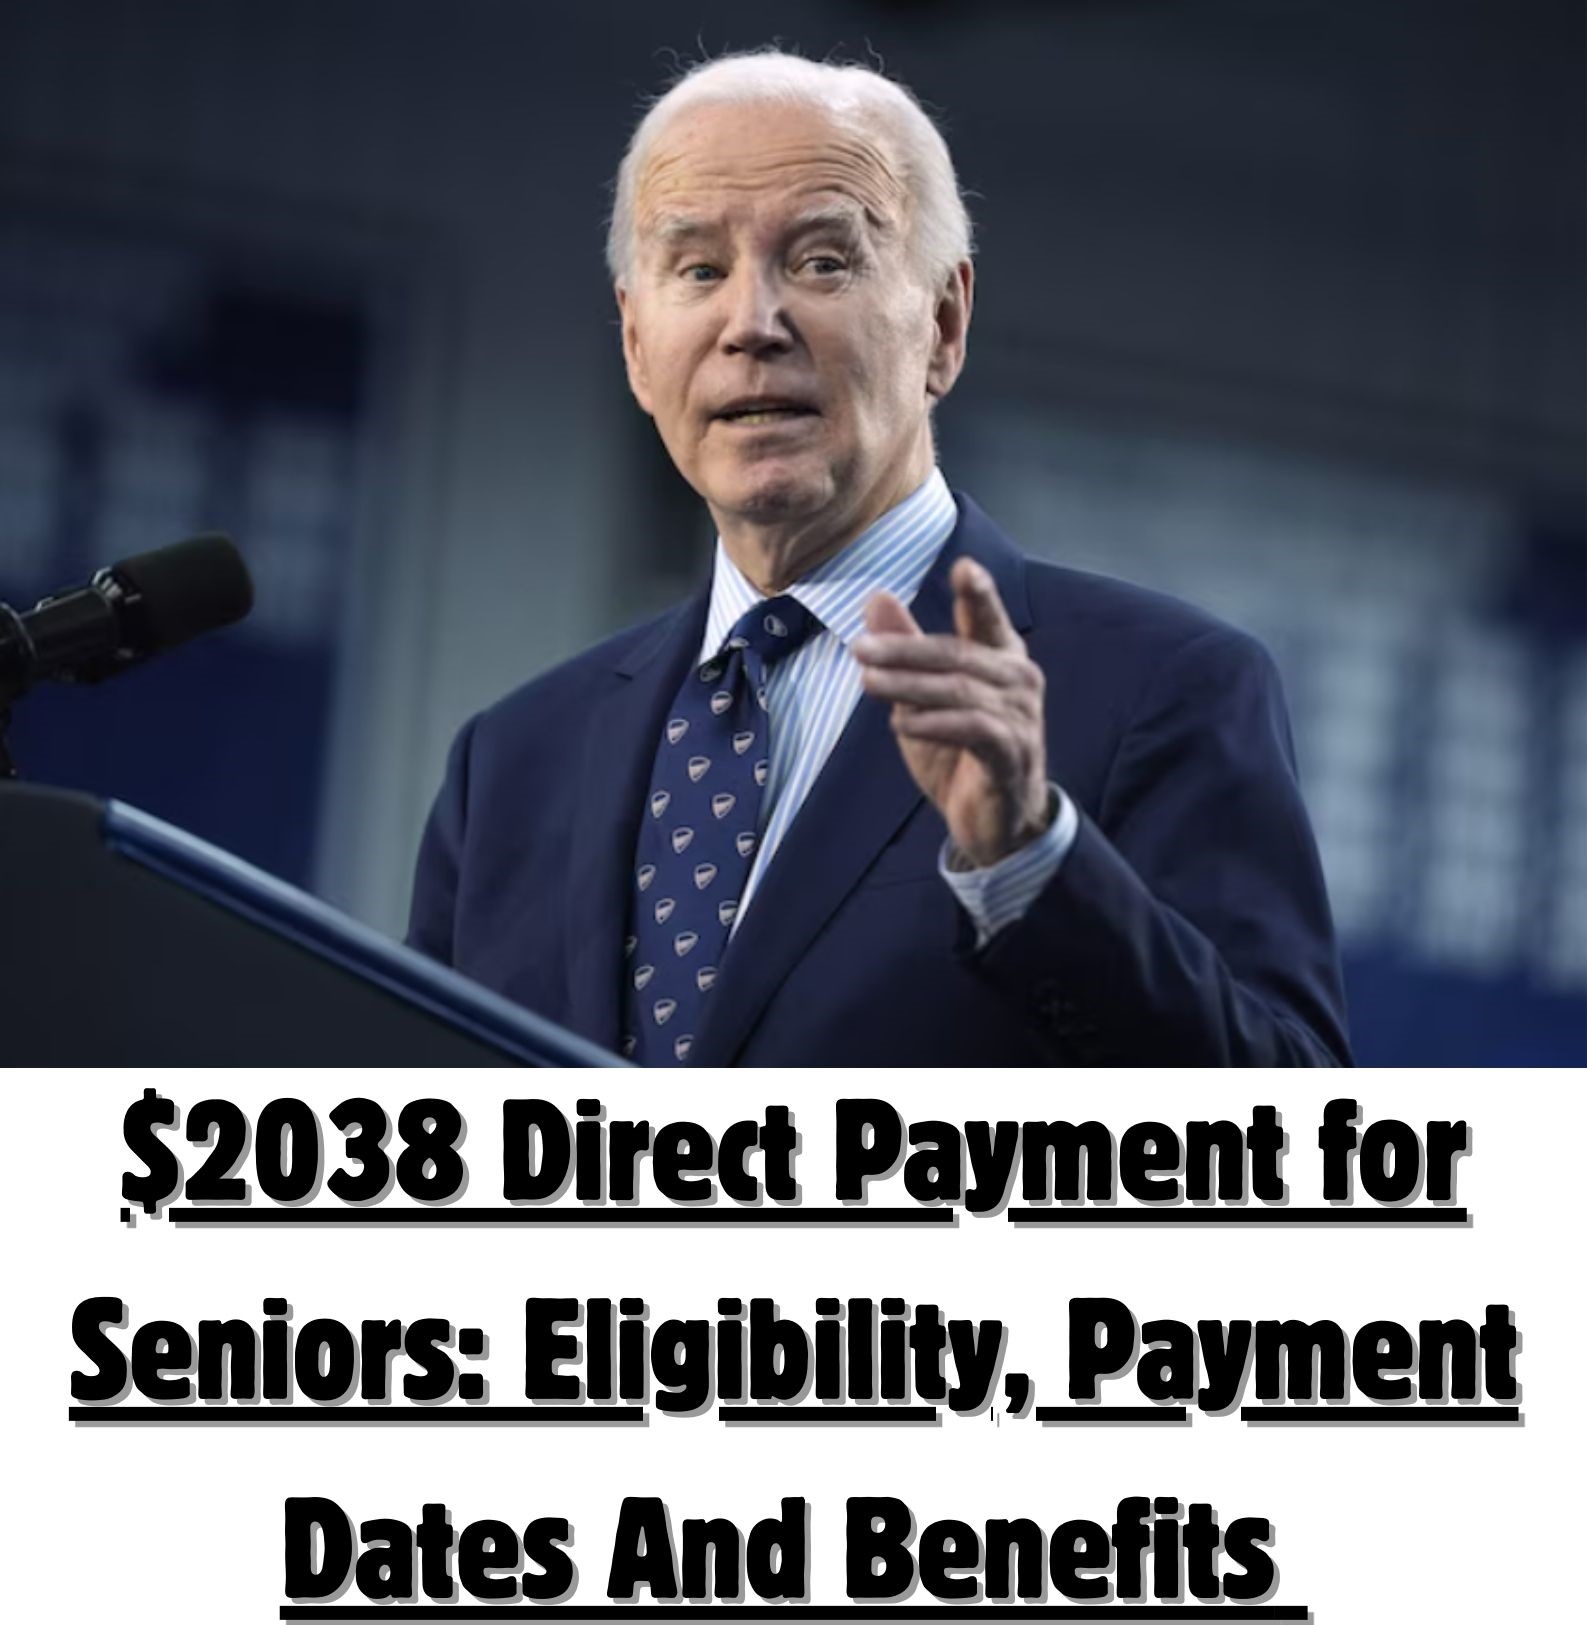 $2038 Direct Payment for Seniors: Eligibility, Payment Dates And Benefits